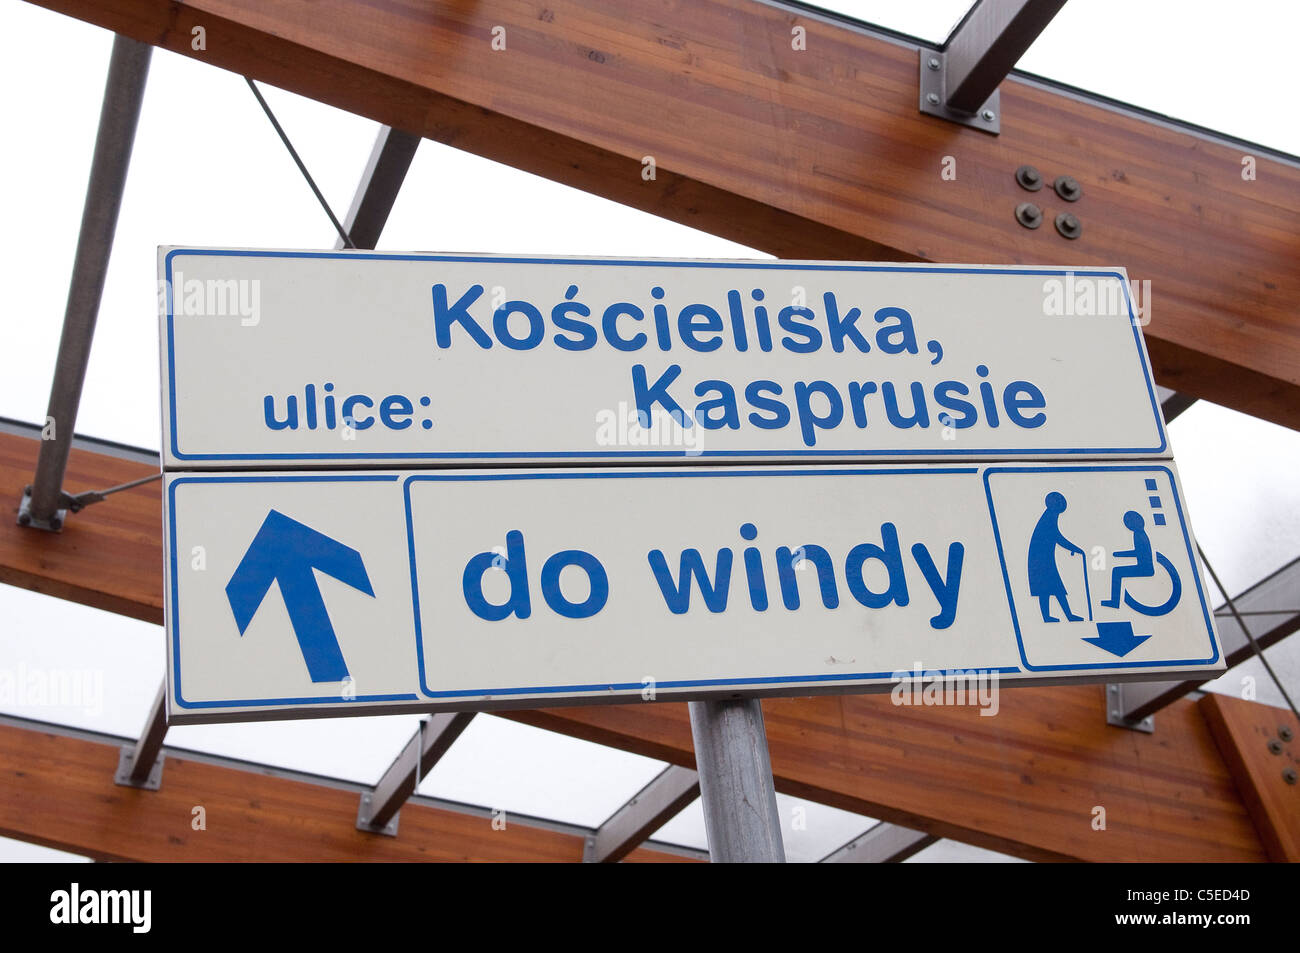 'To the elevator' sign Poland. Stock Photo